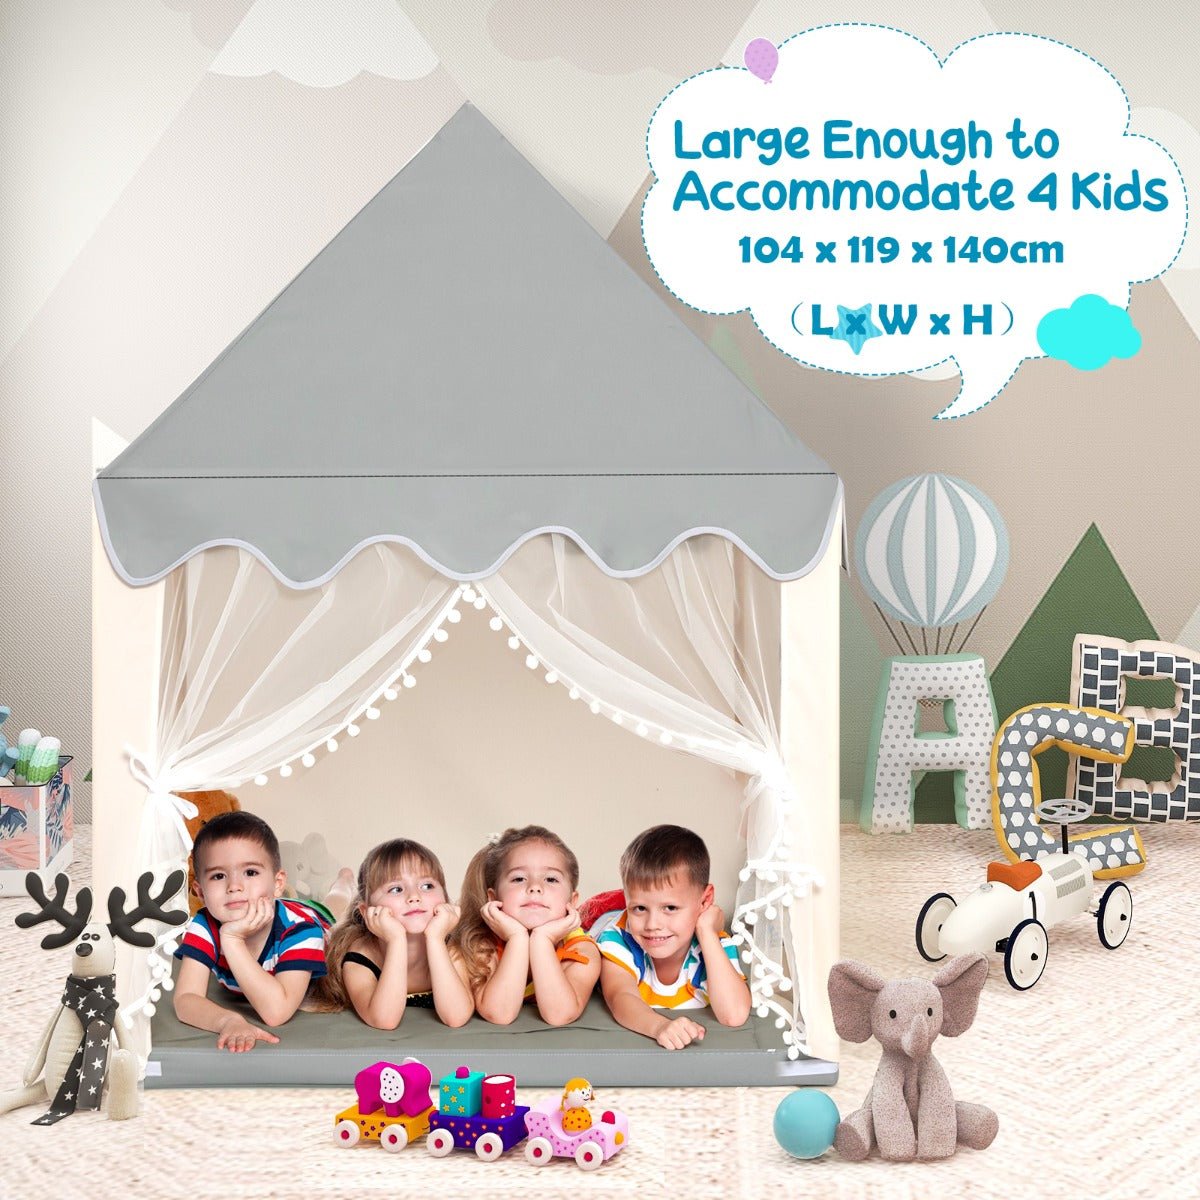 A Playhouse for Kids Adventures - Get Yours Today!